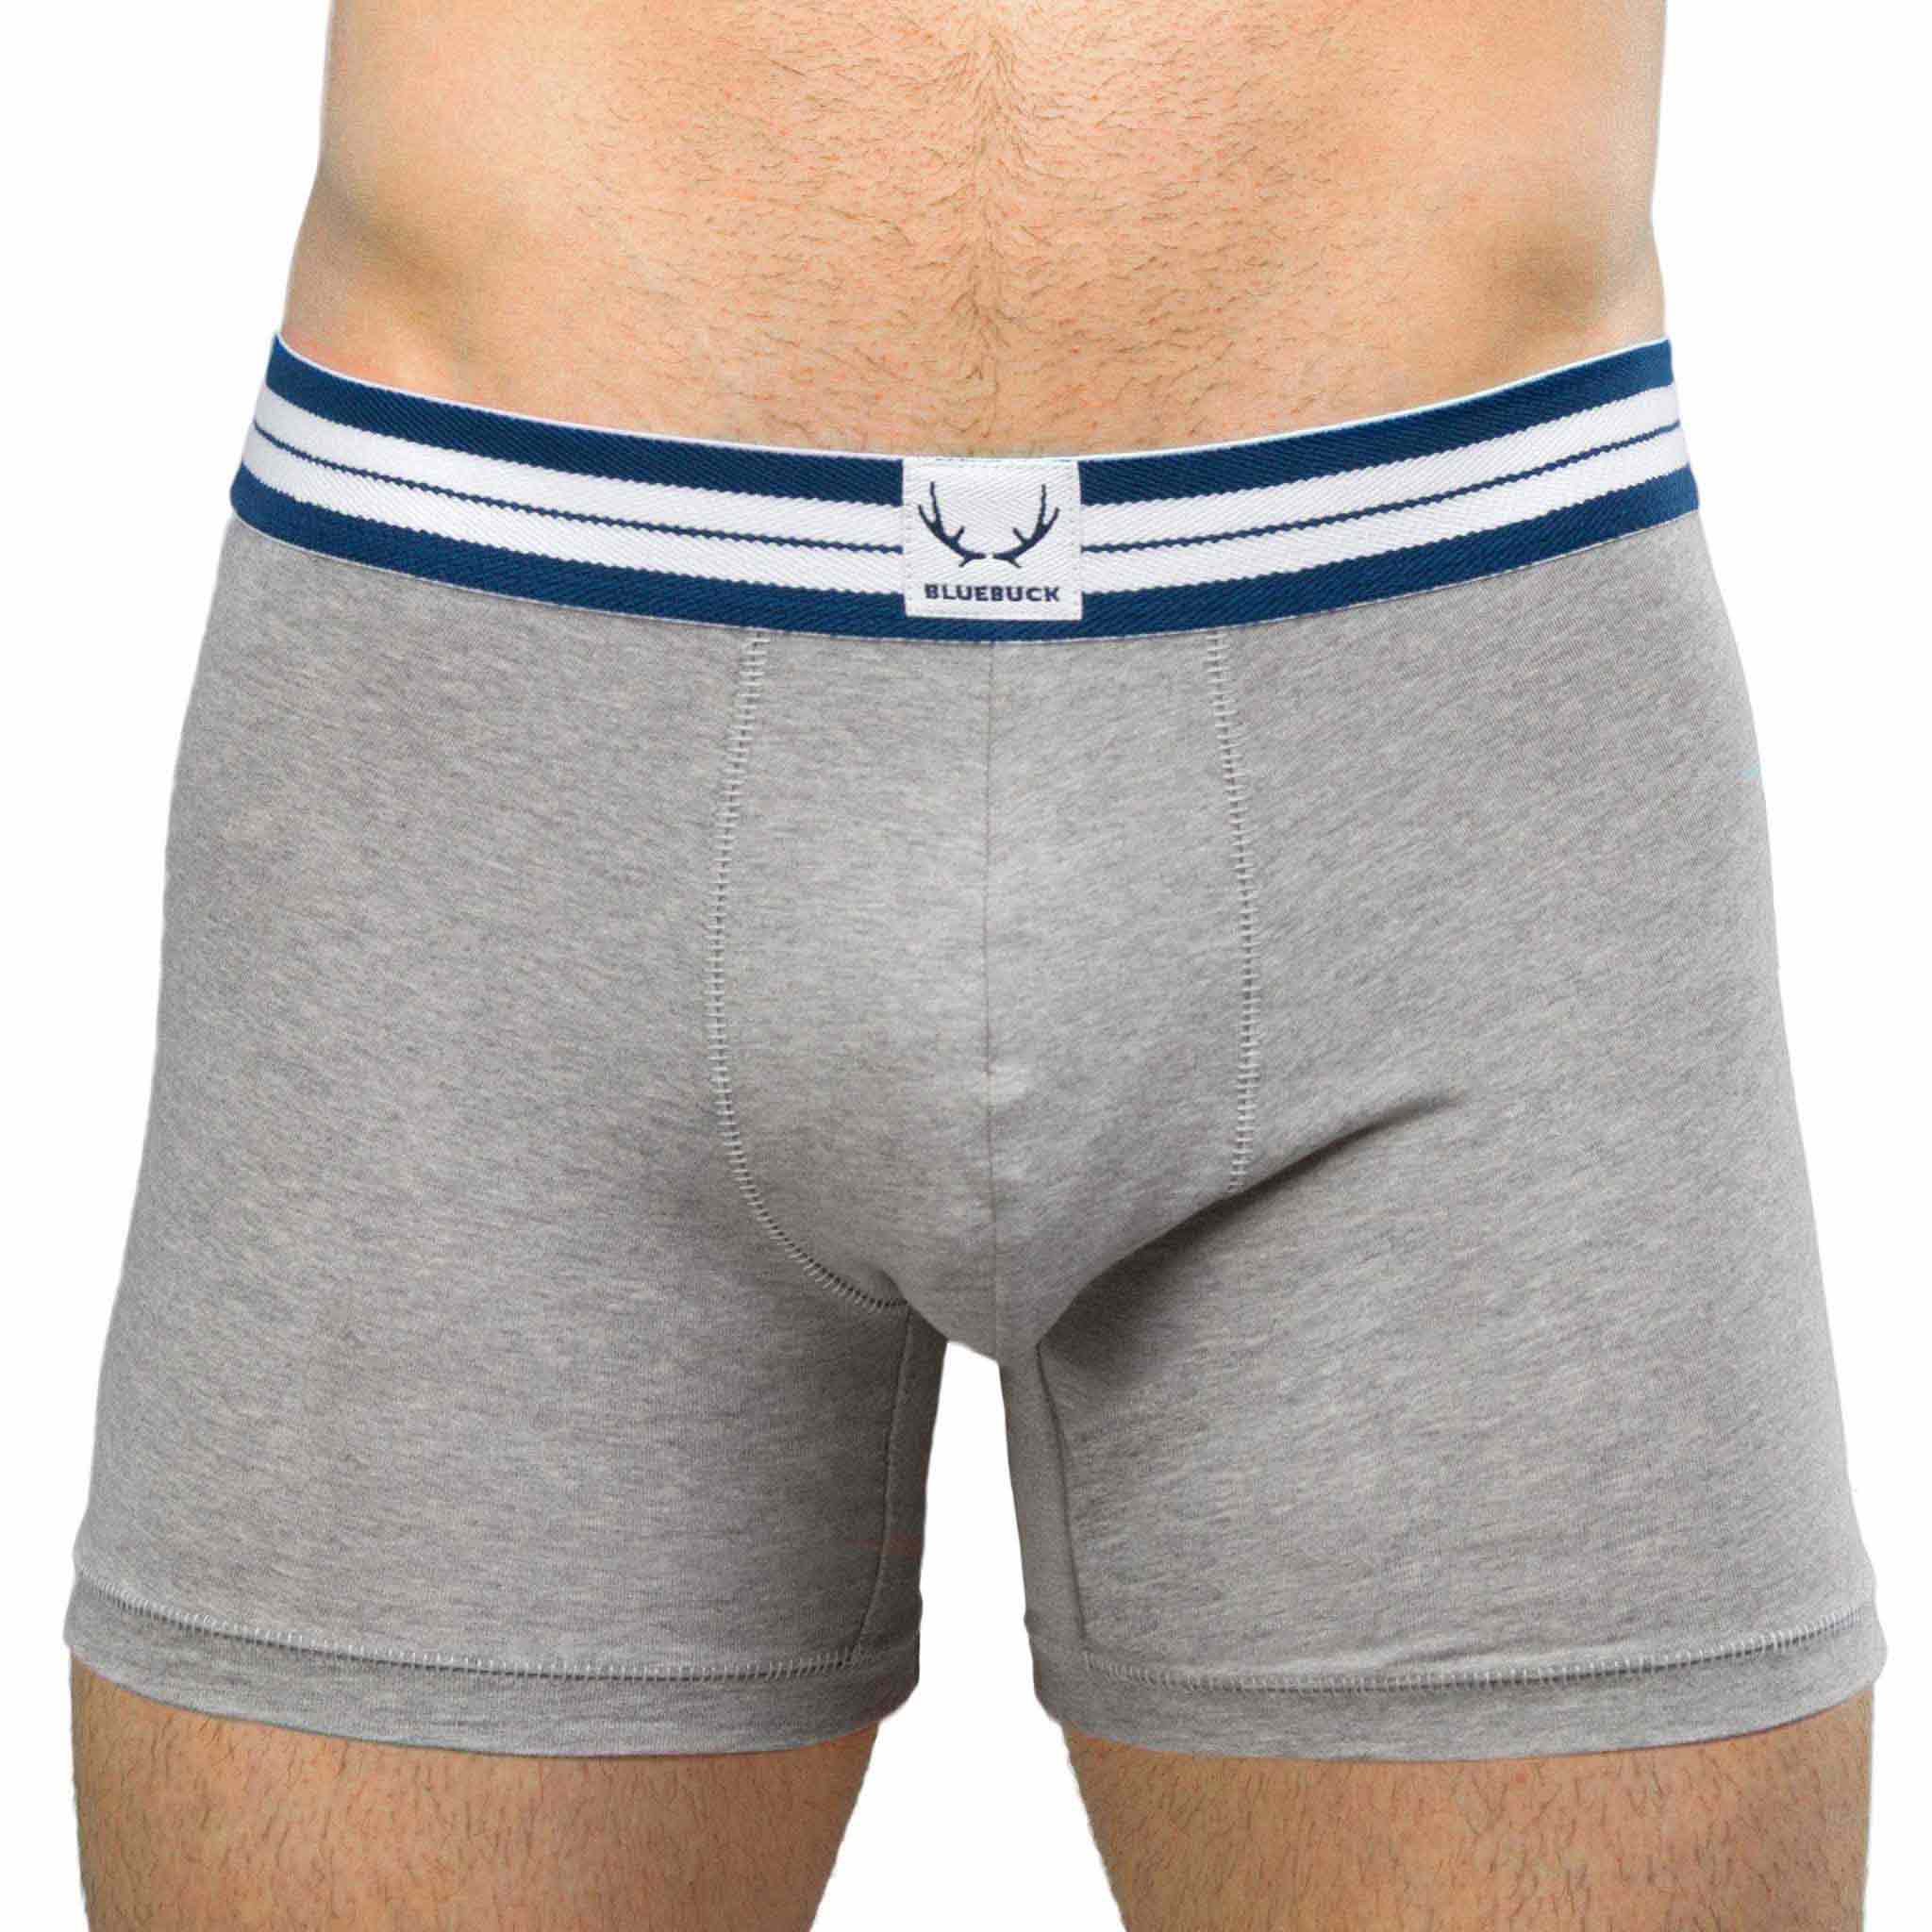 Gray long boxer shorts made of organic cotton from Bluebuck